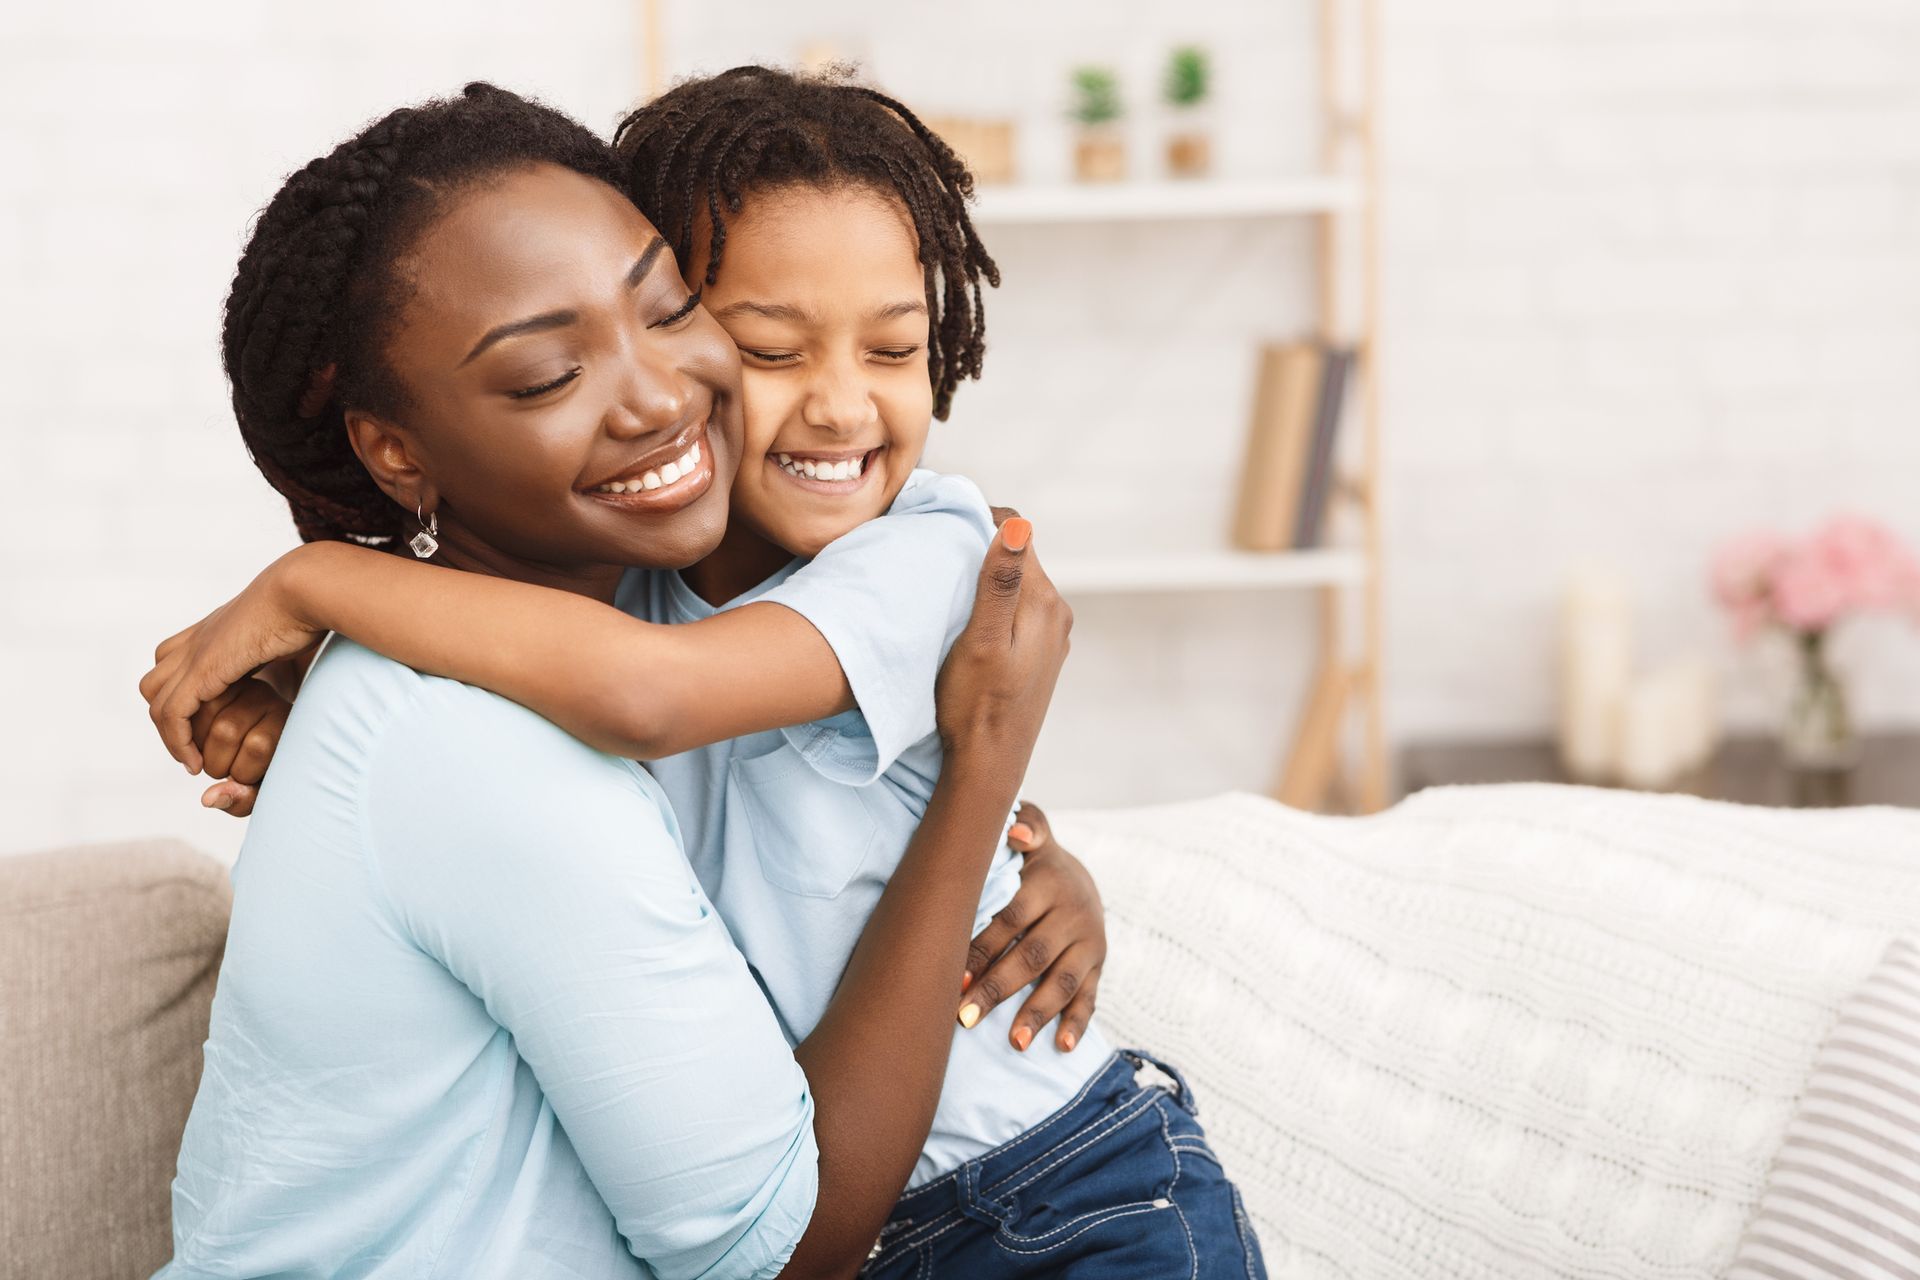 A woman and a child are hugging each other on a couch.